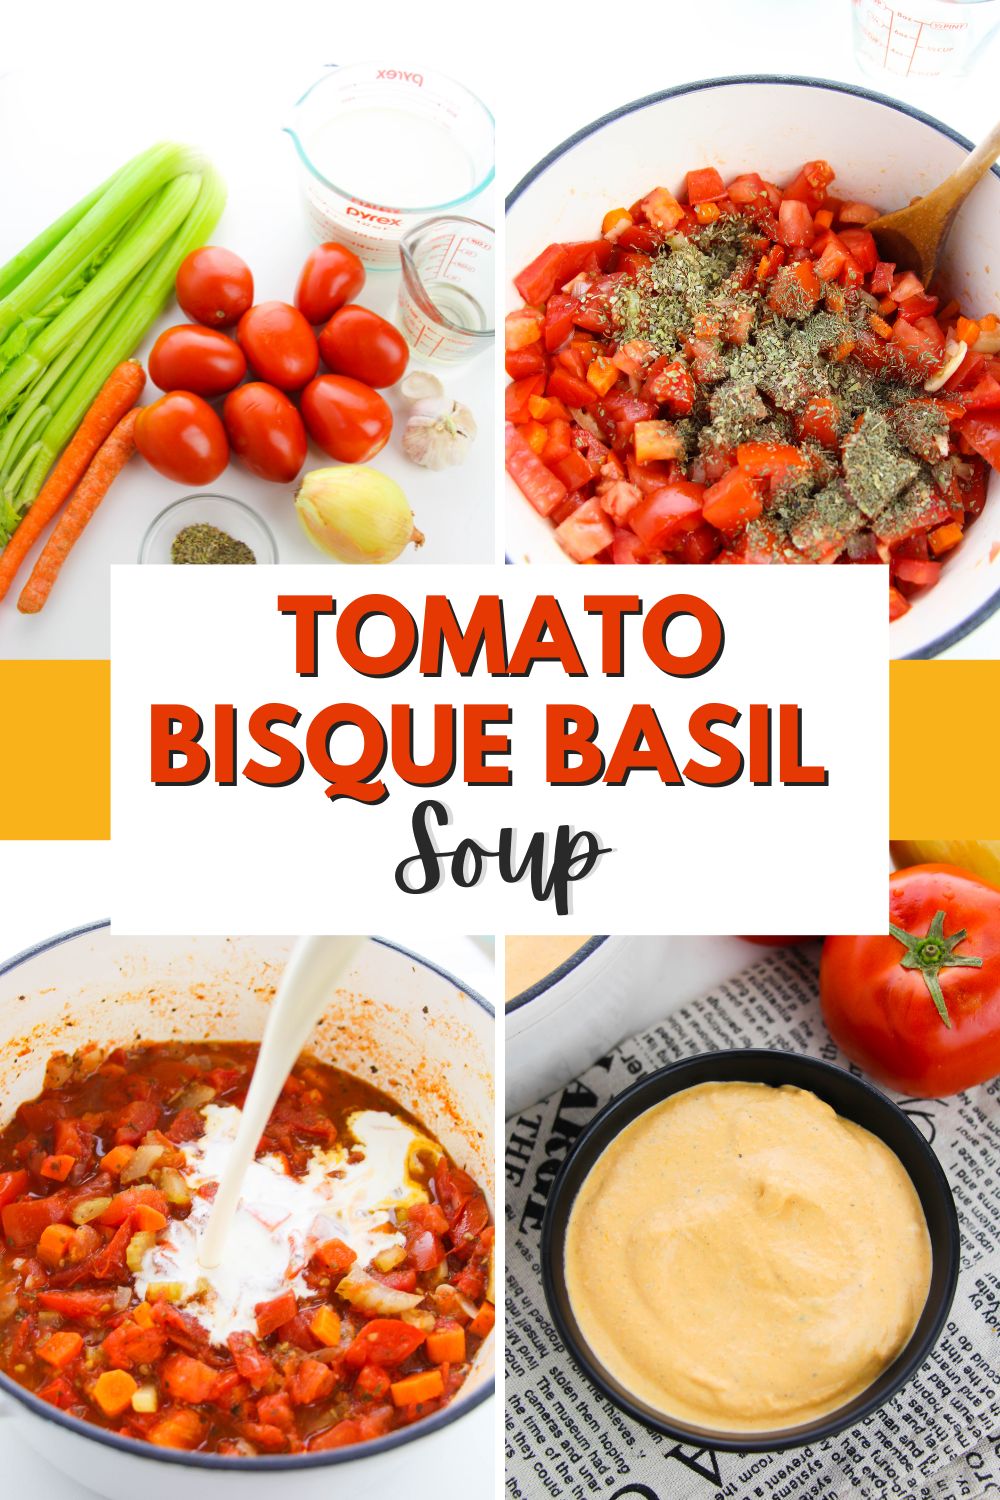 Rich and creamy tomato bisque with a hint of fresh basil.